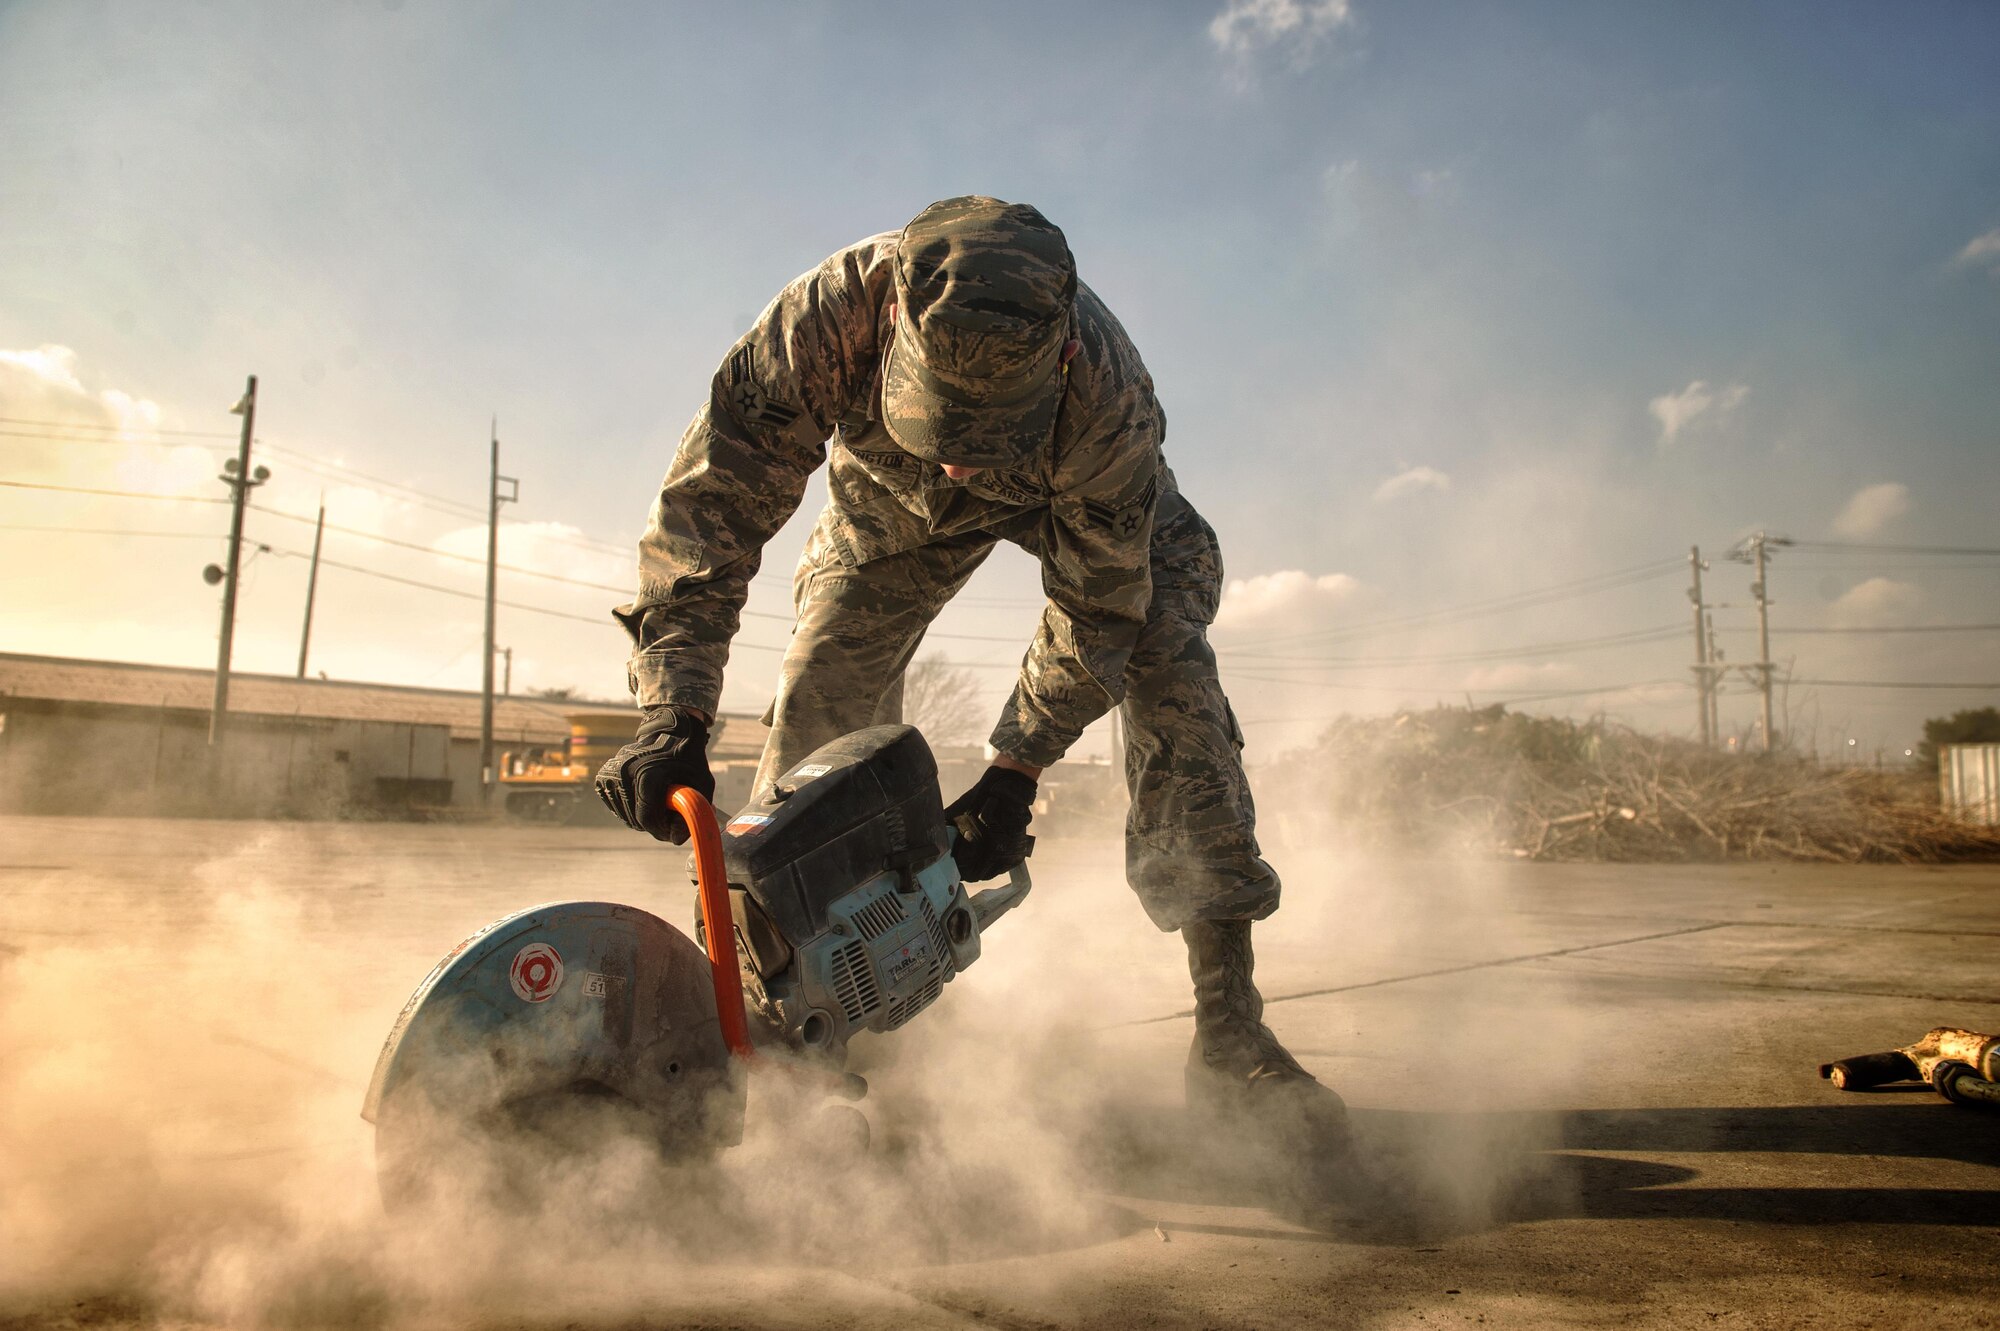 Airman 1st Class Connor Harrington, 374th Civil Engineer Squadron pavement and equipment apprentice, performs a spall repair at Yokota Air Base, Japan, Jan. 13, 2016. From keeping the flightline mission ready to maintaining the roads and sidewalks, the behind the scenes work done by the group of Airmen known as the 'Dirt Boys' keep Yokota's mission going. (U.S. Air Force photo by Airman 1st Class Delano Scott/Released)